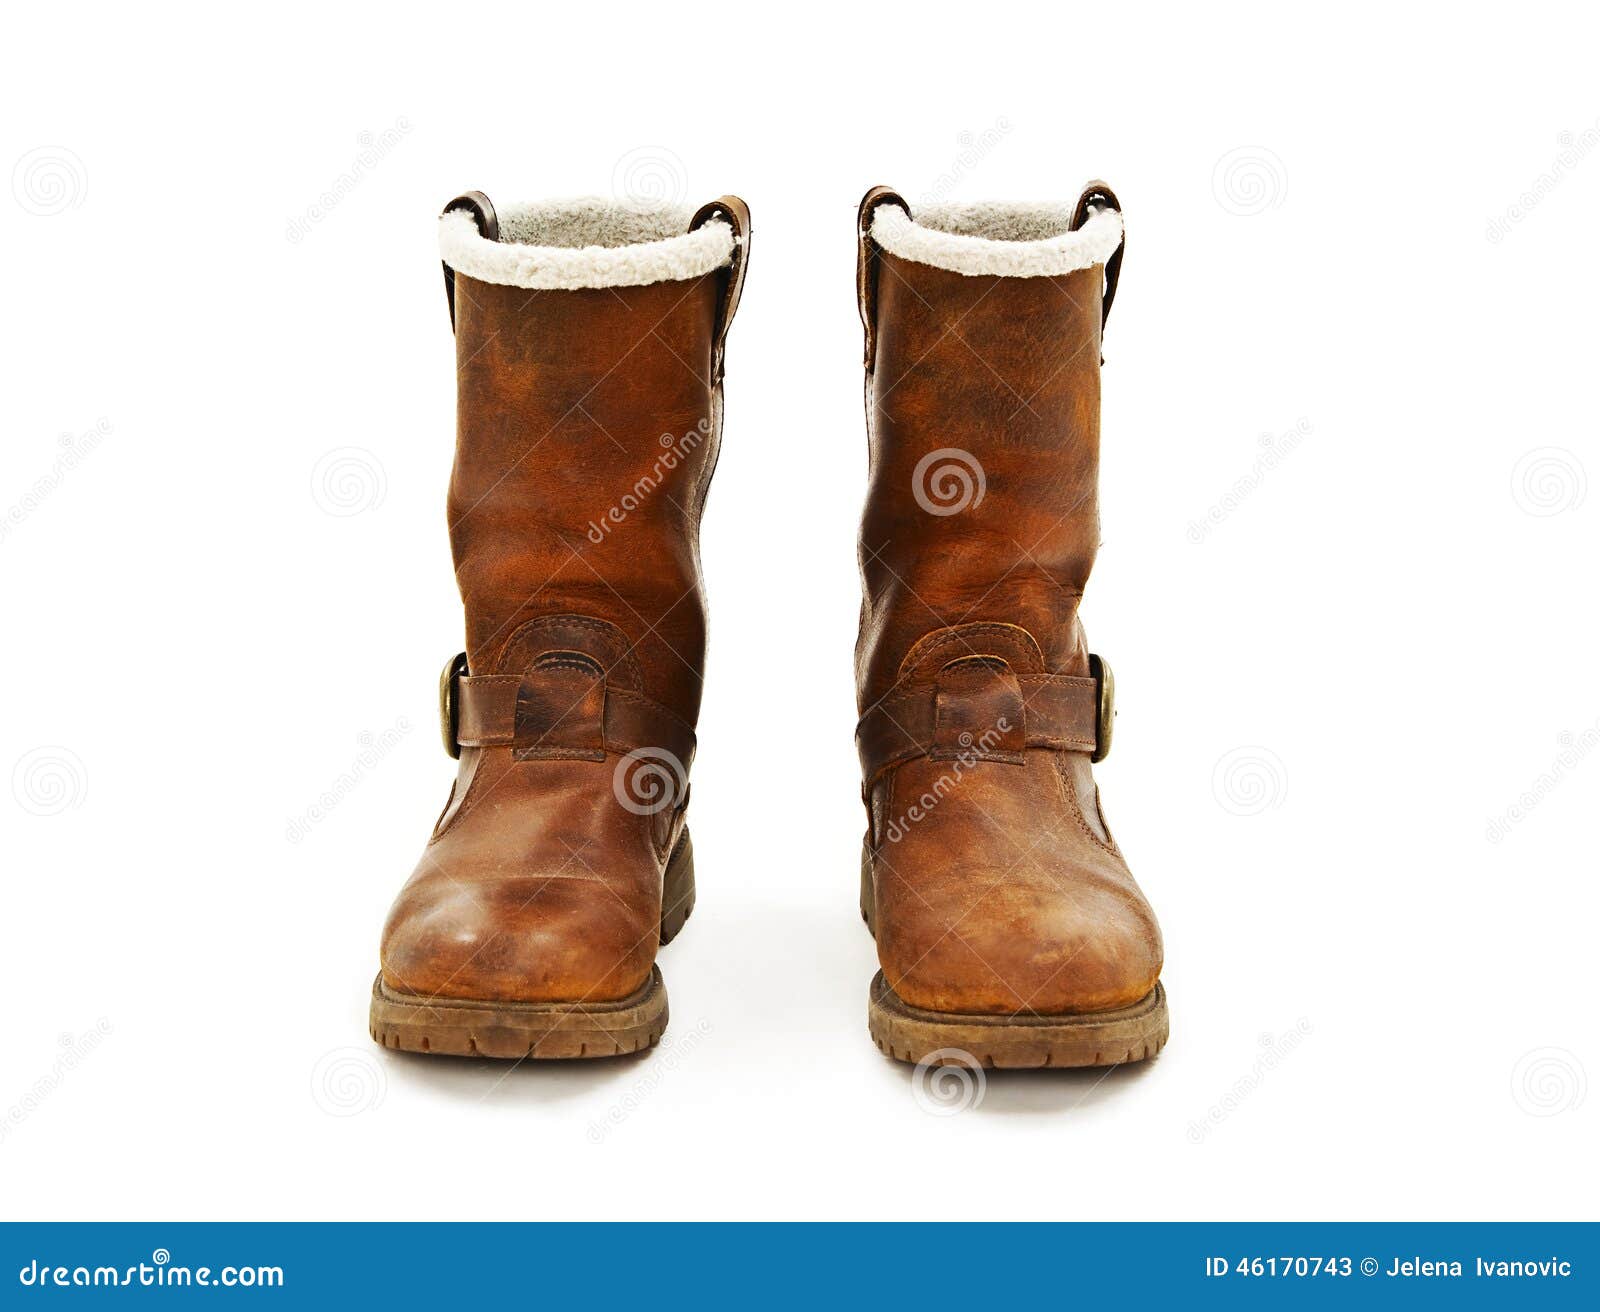 Pair of brown winter boots stock image. Image of casual - 46170743